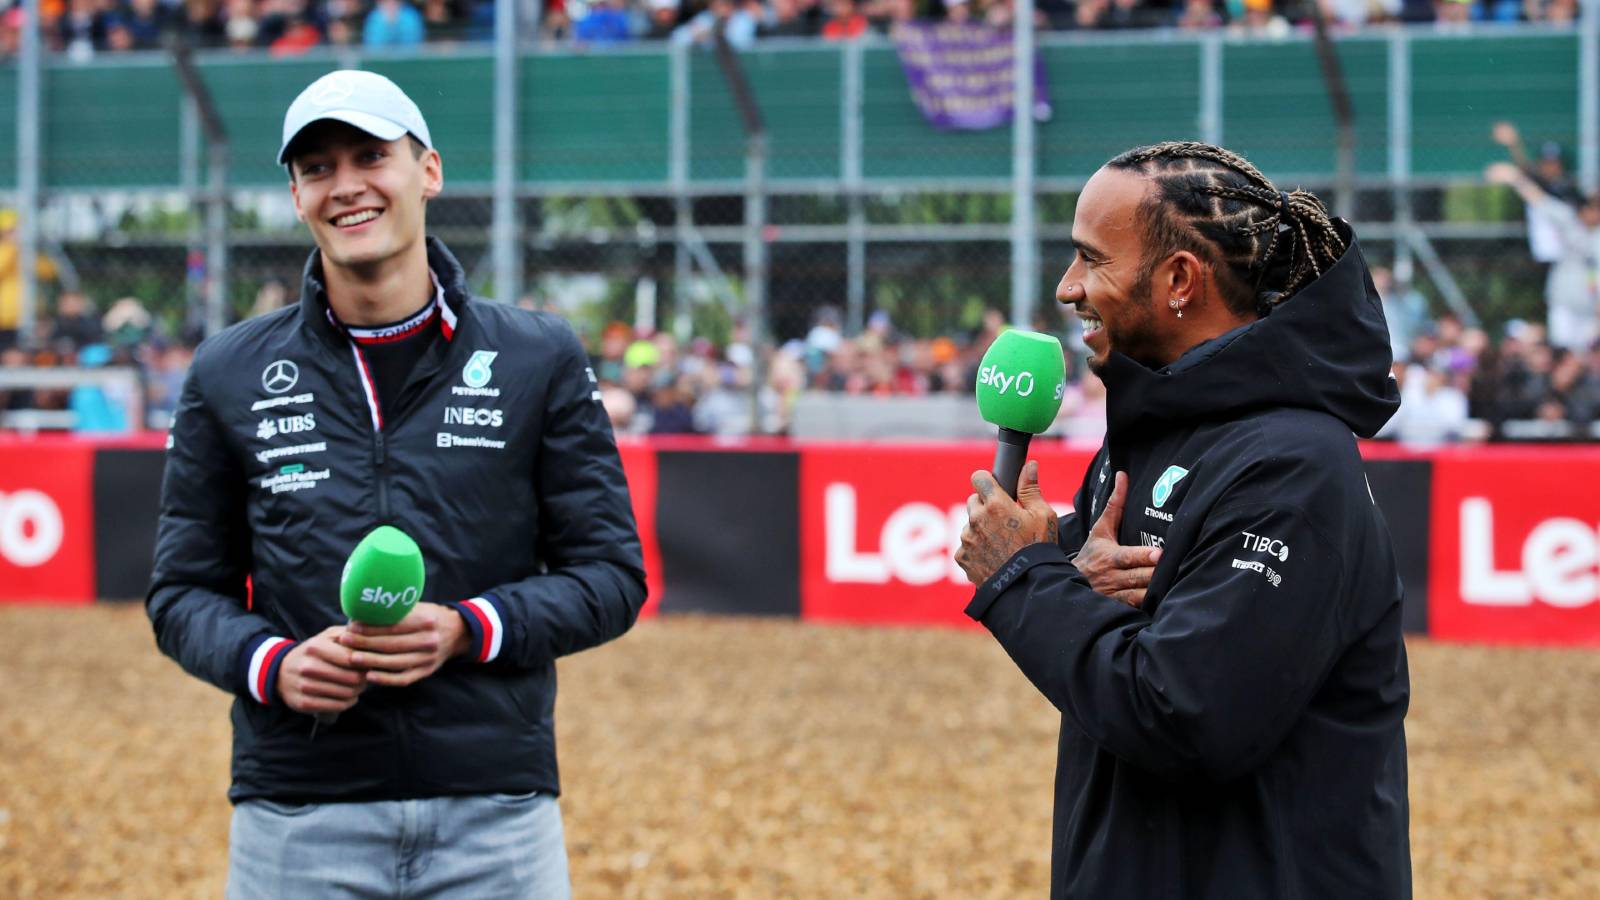 Lewis Hamilton and George Russell talking into microphones. Silverstone July 2022.